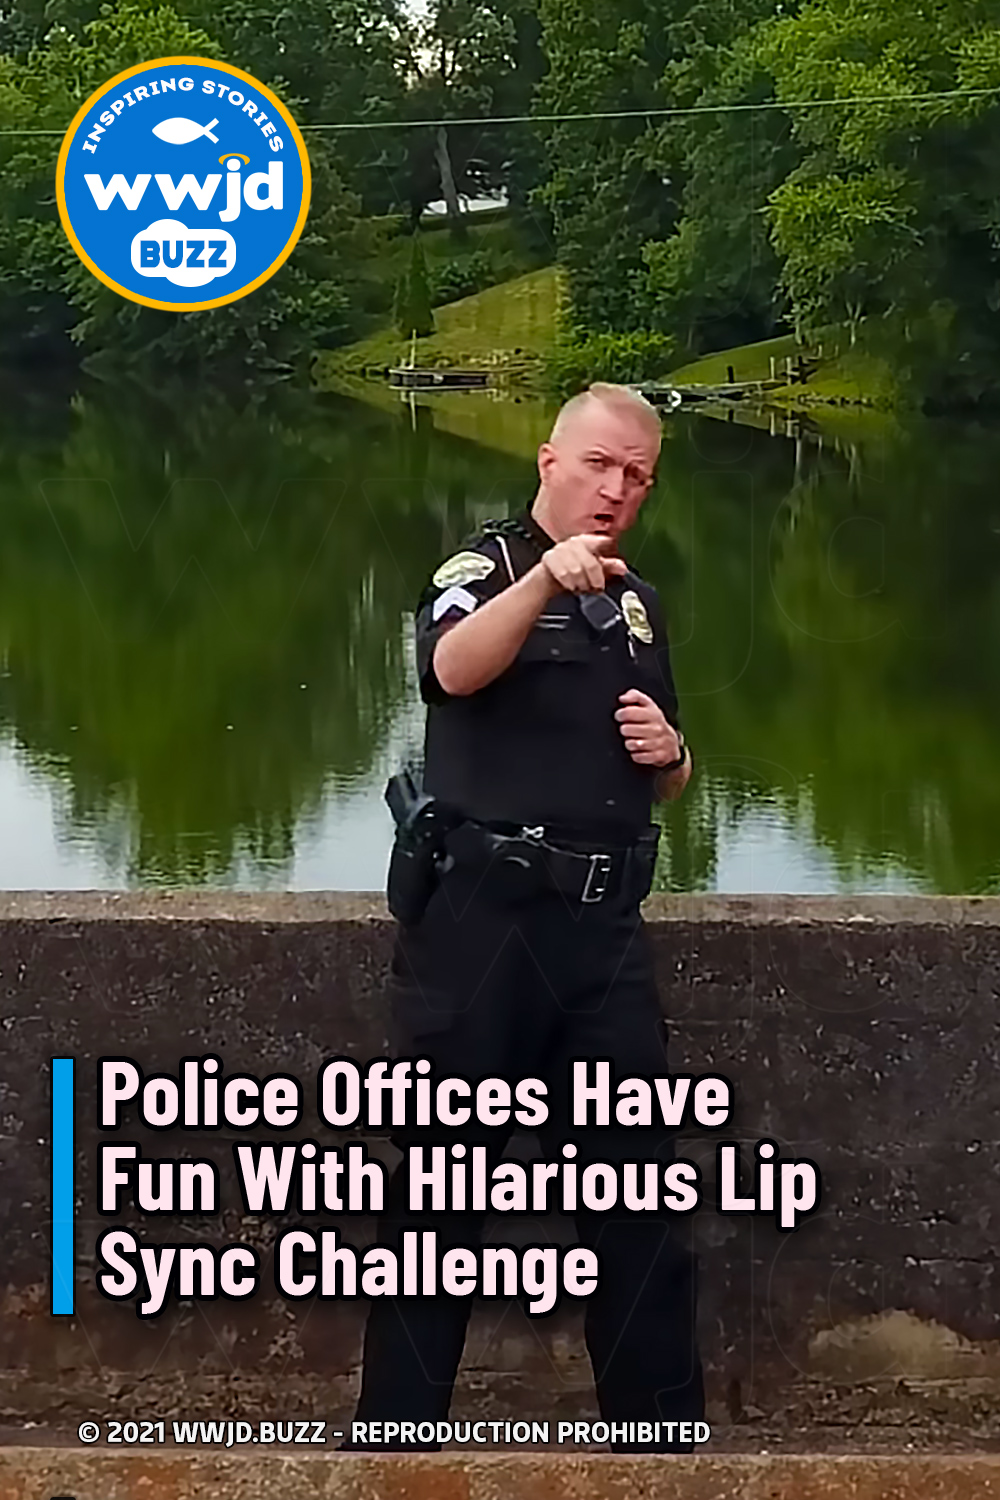 Police Officers Have Fun With Hilarious Lip Sync Challenge